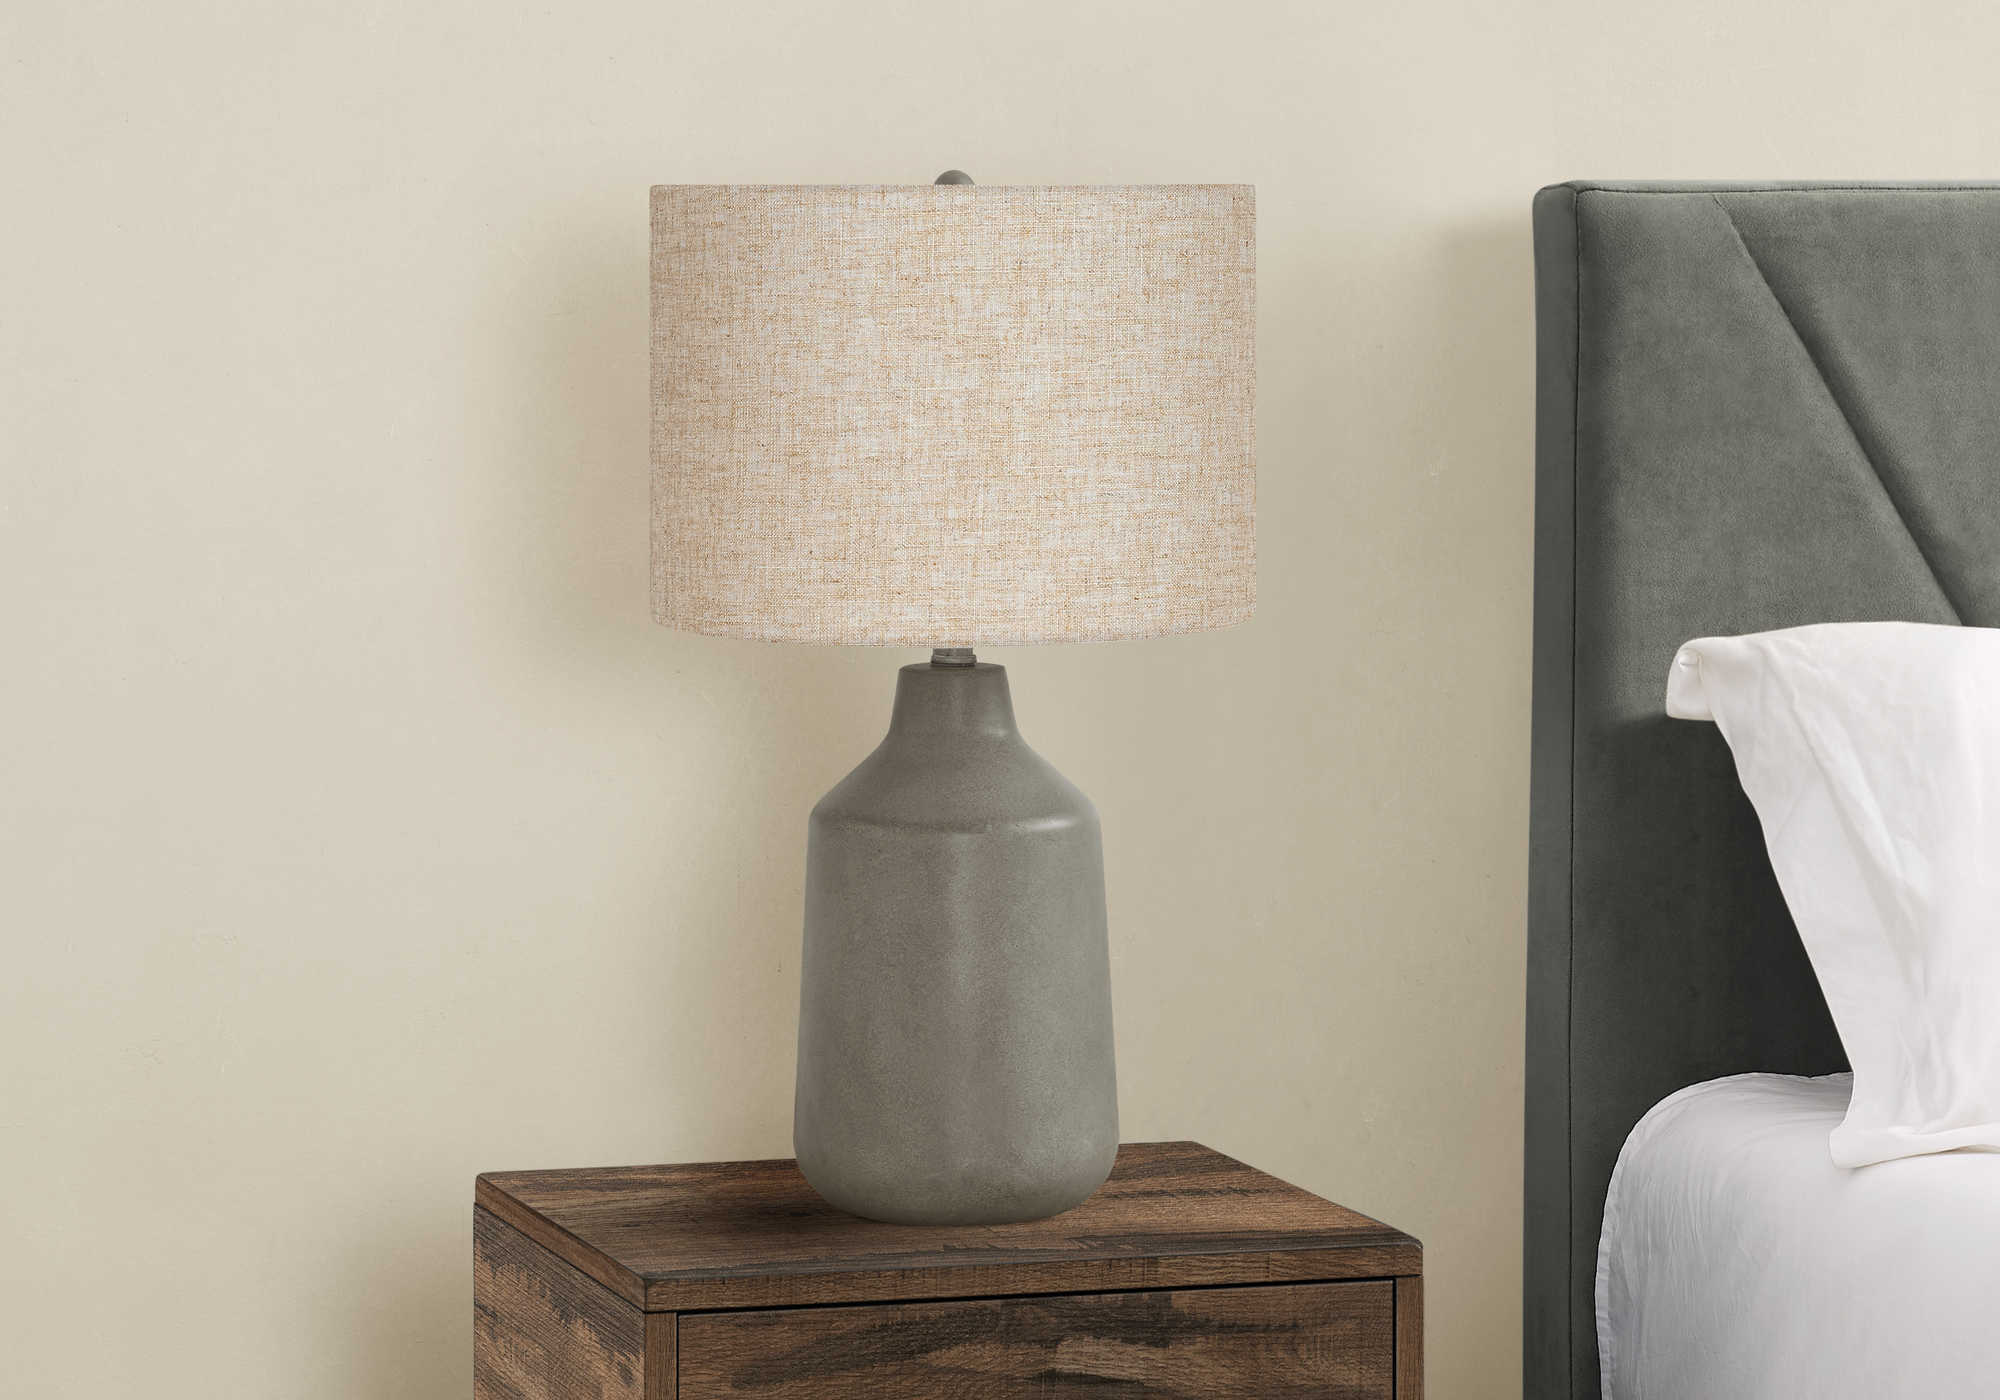 LIGHTING - 24"H TABLE LAMP GREY CONCRETE / BEIGE SHADE